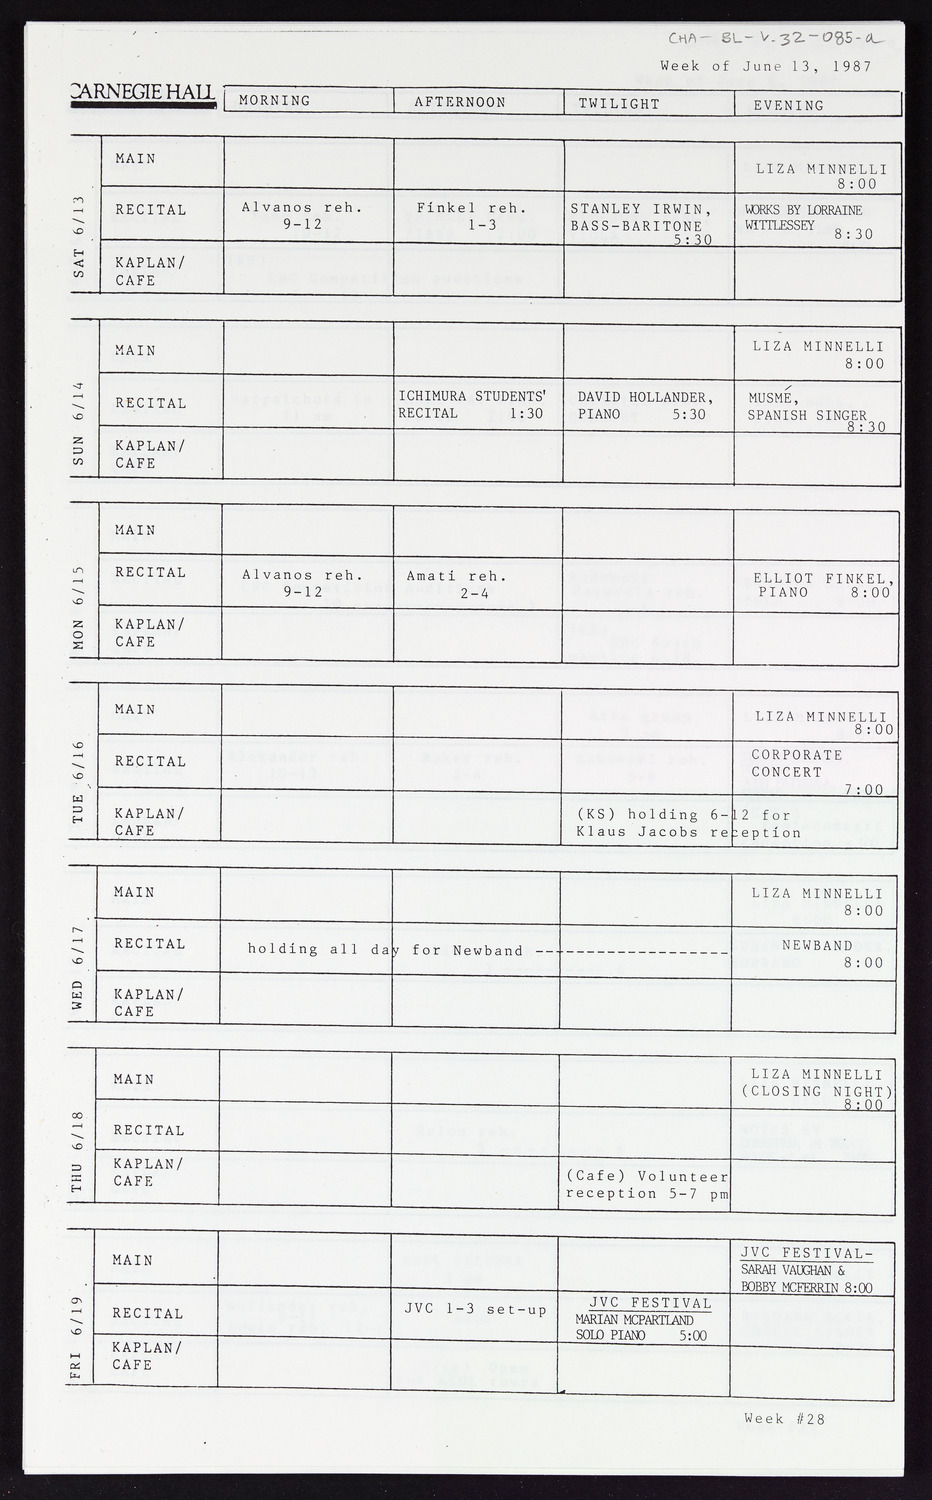 Carnegie Hall Booking Ledger, volume 32, page 85a